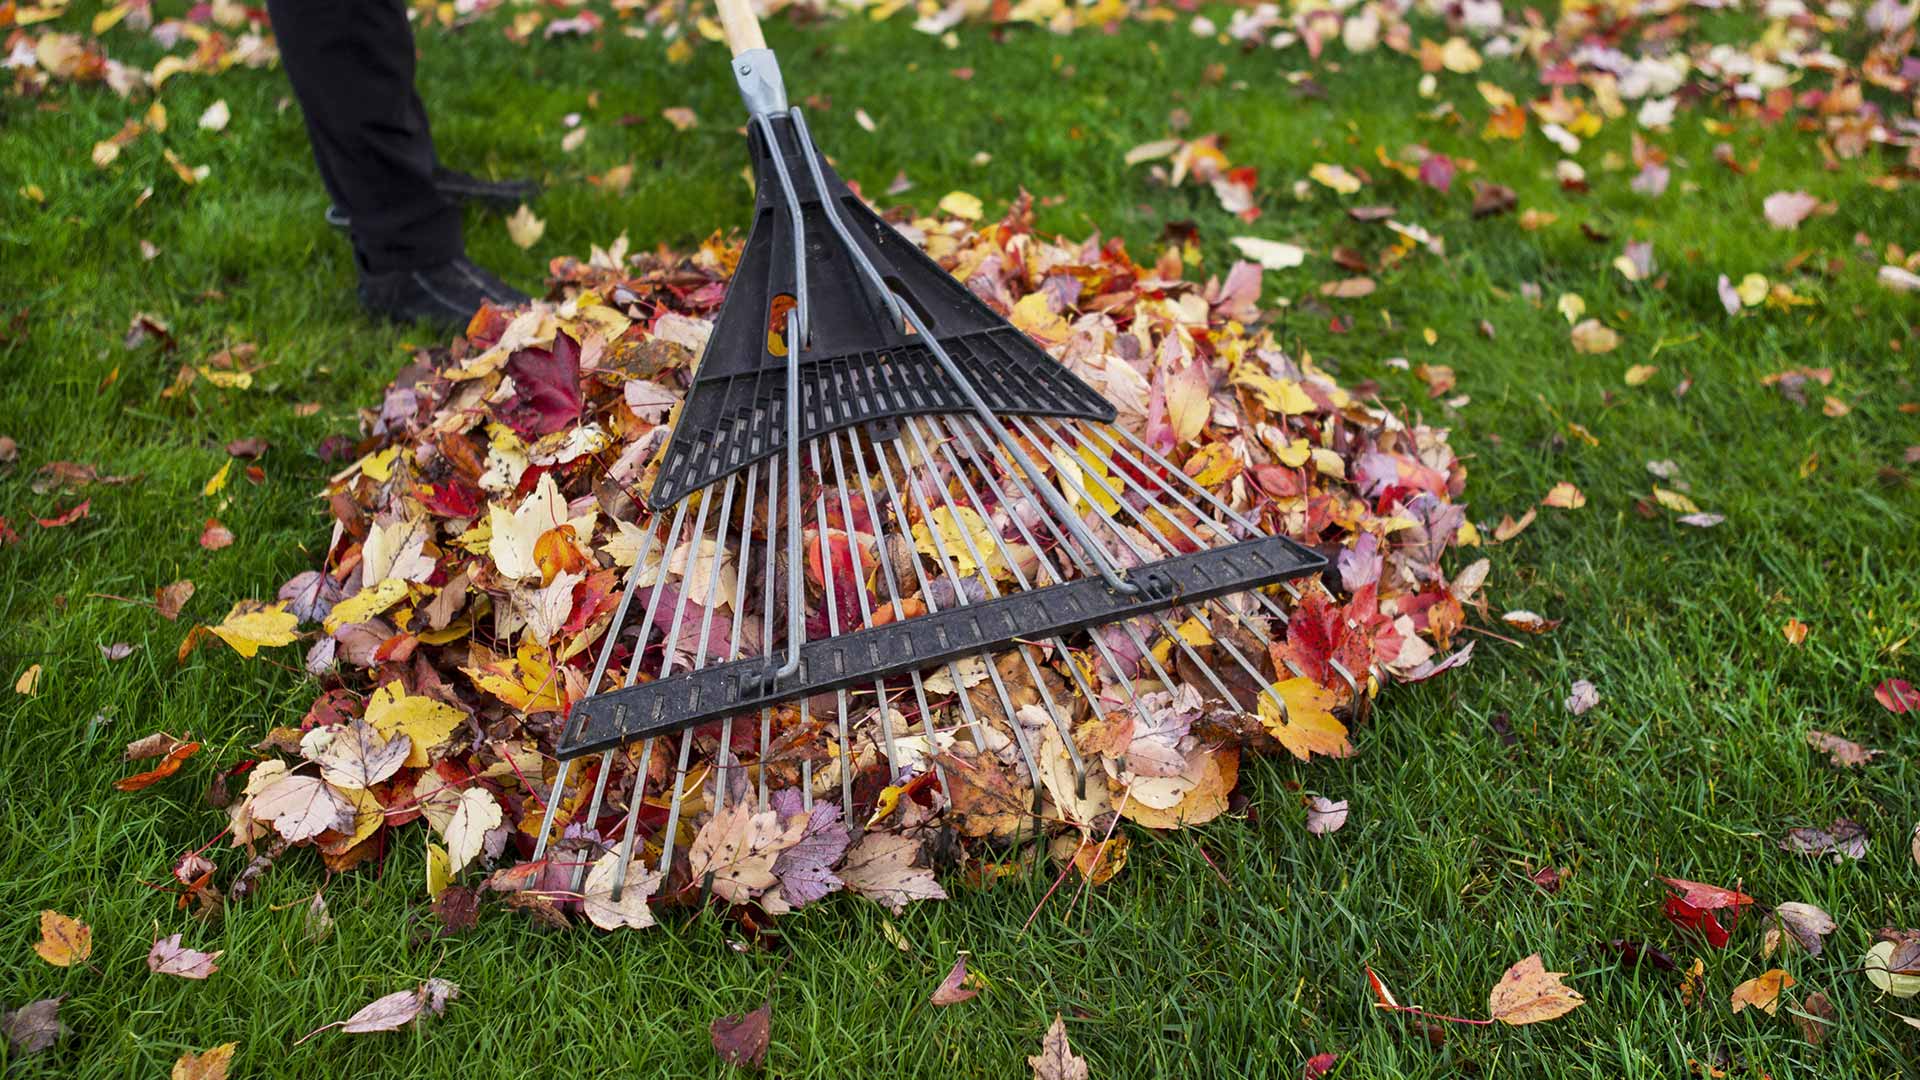 Leaves being raked from a lawn near Phoenix, Arizona.